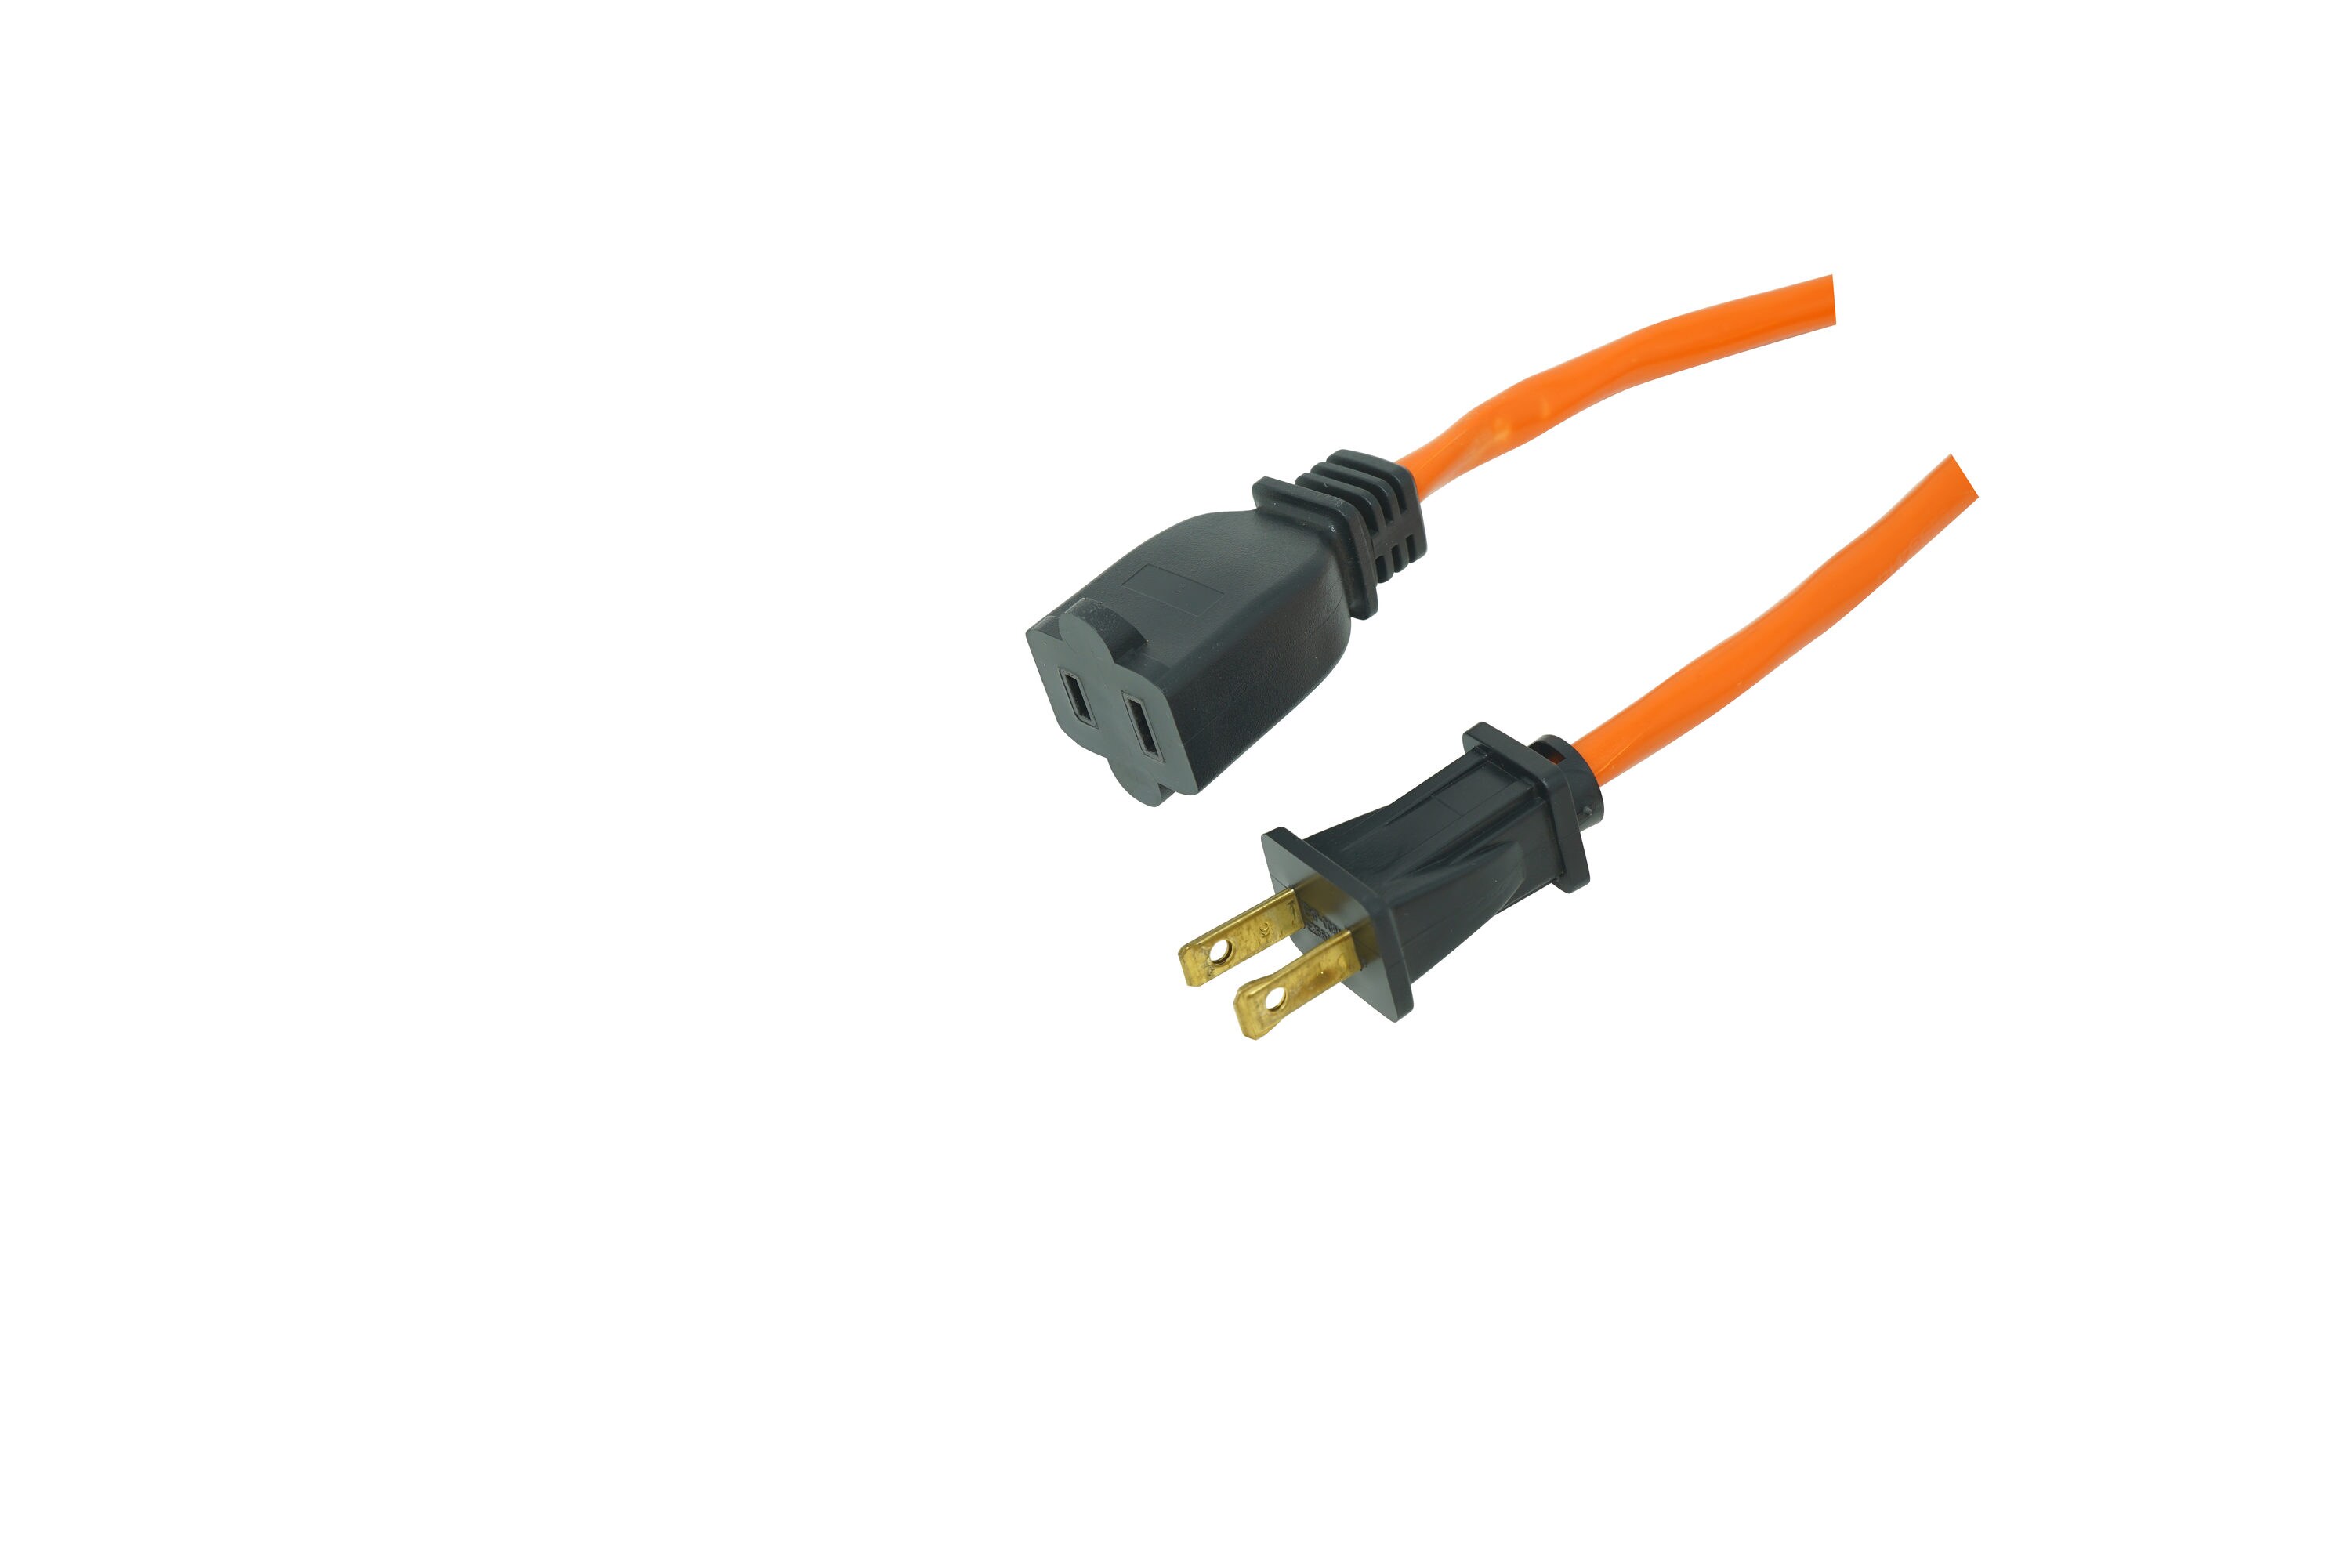 25m Extension Lead For Bouncy Castle Blowers 13 AMP to 16 AMP 16A Cable Orange 